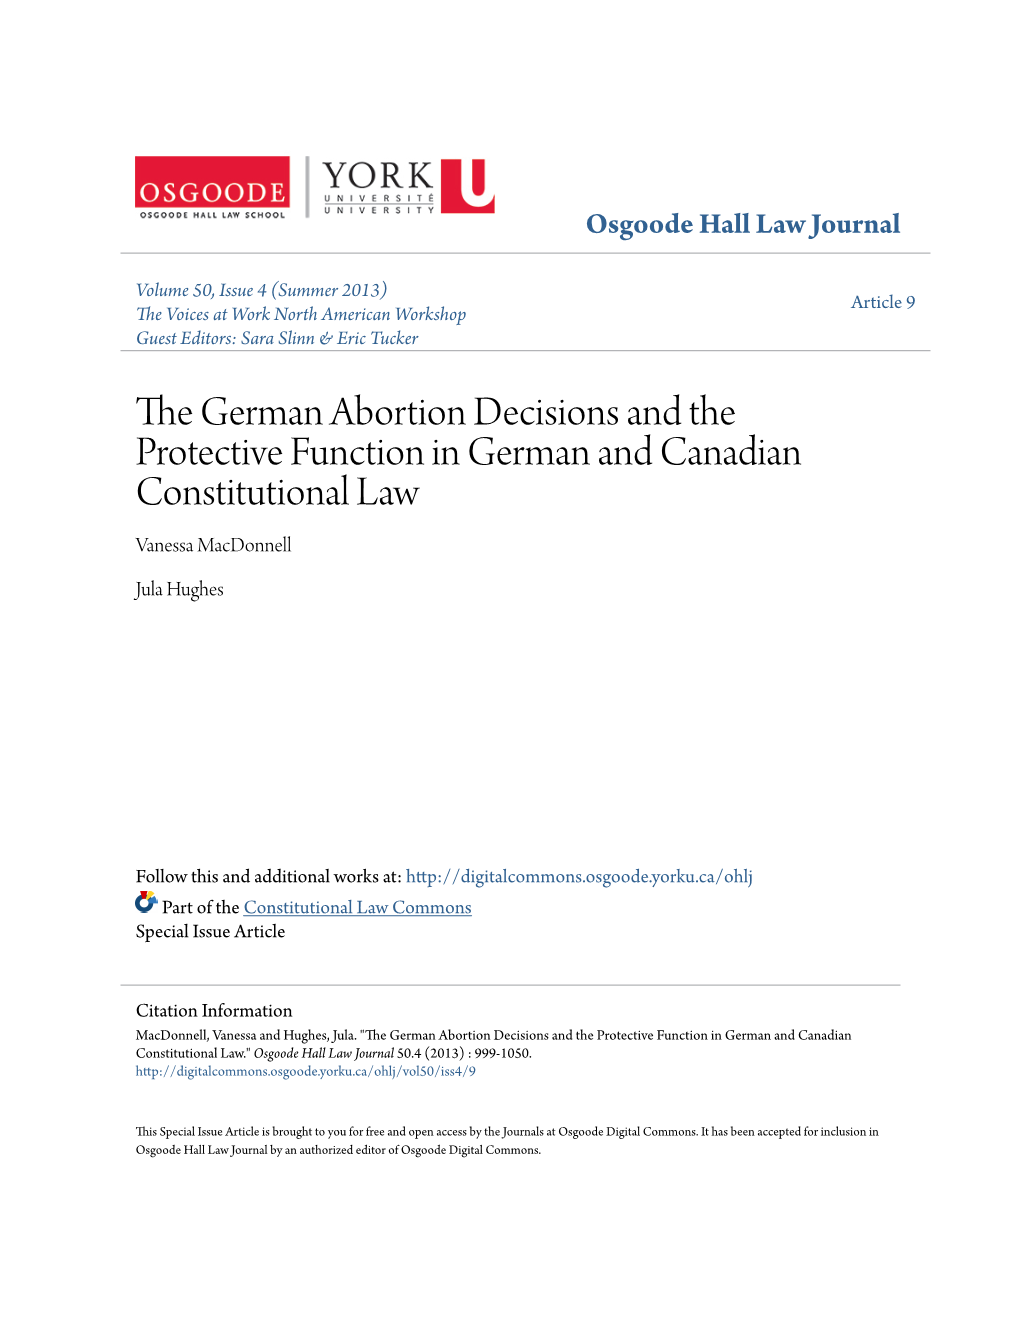 The German Abortion Decisions and the Protective Function in German and Canadian Constitutional Law Vanessa Macdonnell